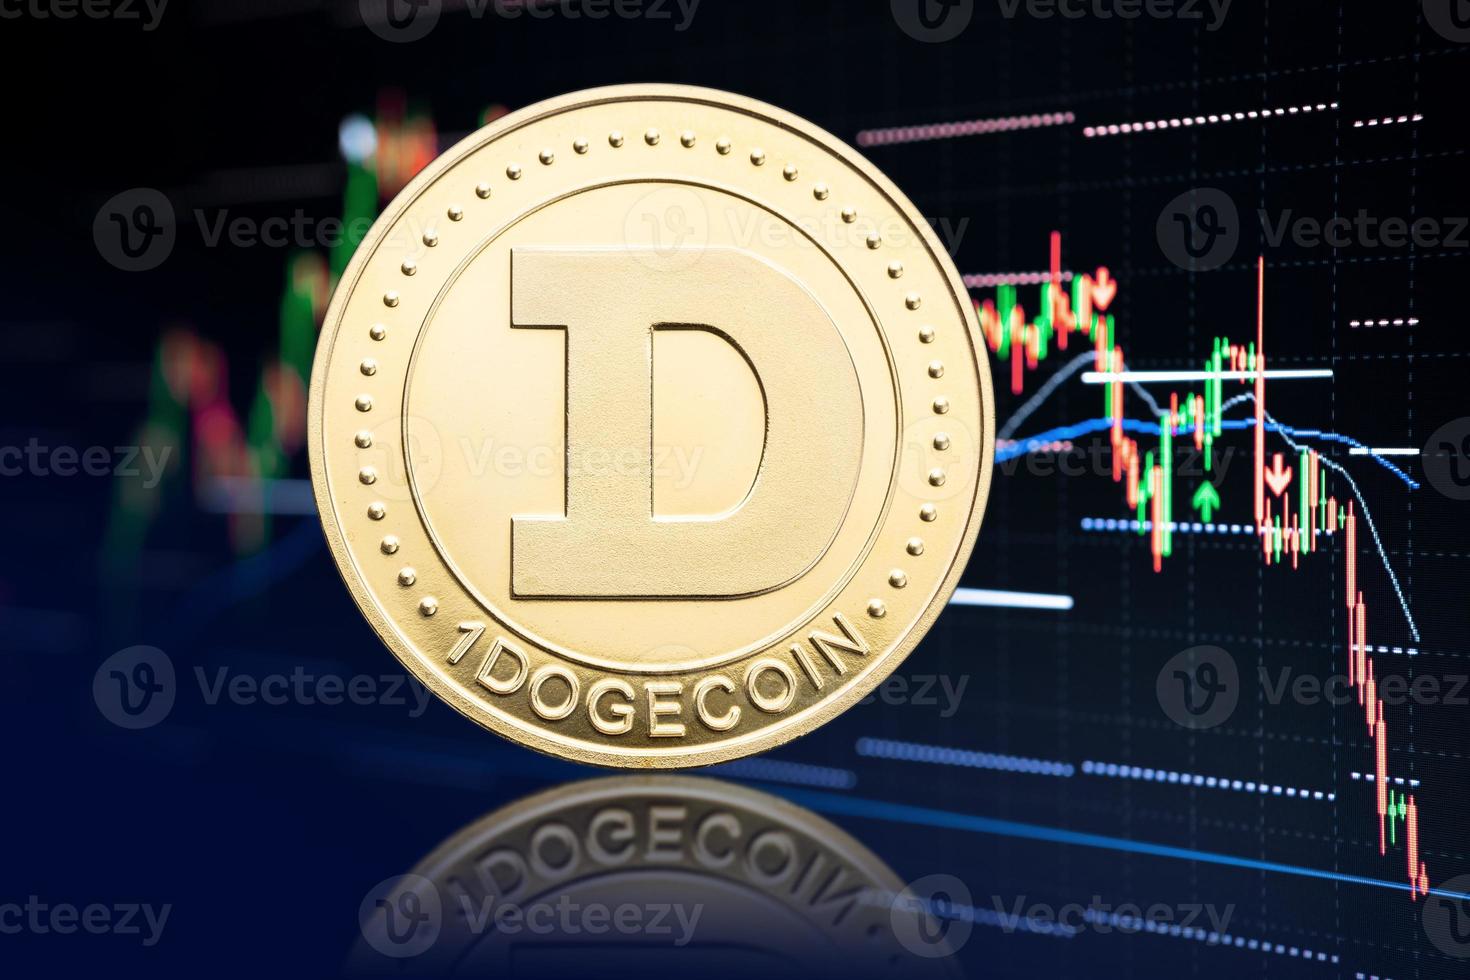 Dogecoin coin and stock chart background with price falling Cryptocurrency photo